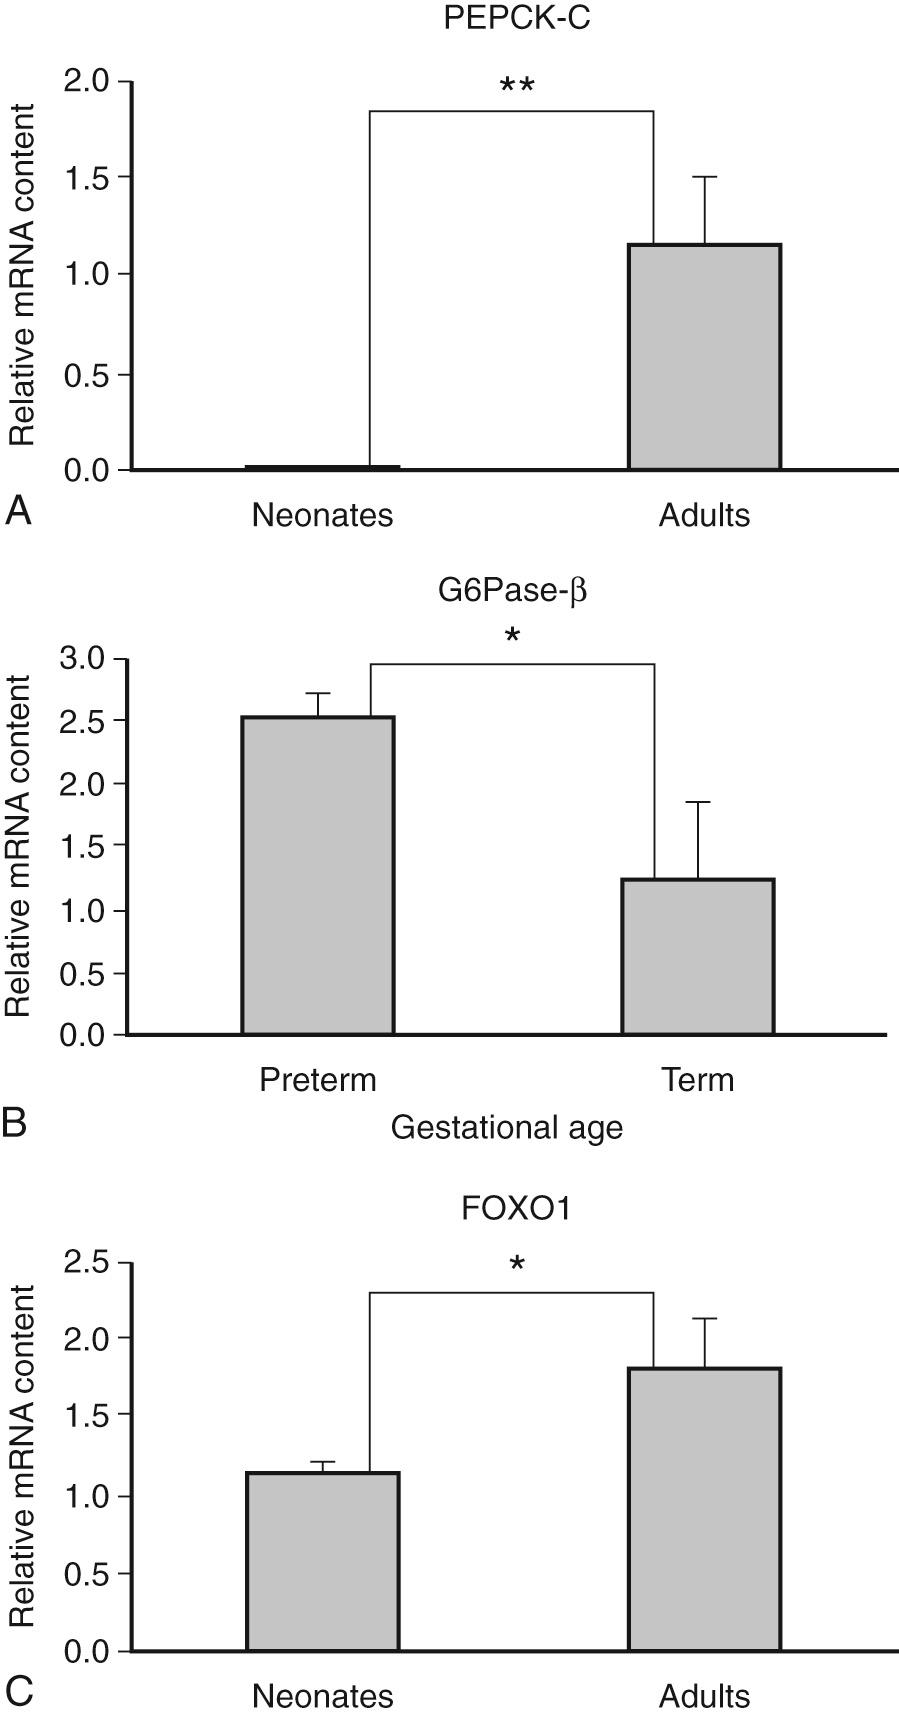 Fig. 86.2, Postnatal changes in gene expression of key gluconeogenic molecules in preterm baboons at 125 days, term 185 d and adult PEPCK-C (A) , G6Pase-b (B) , and FOXO1 (C) .